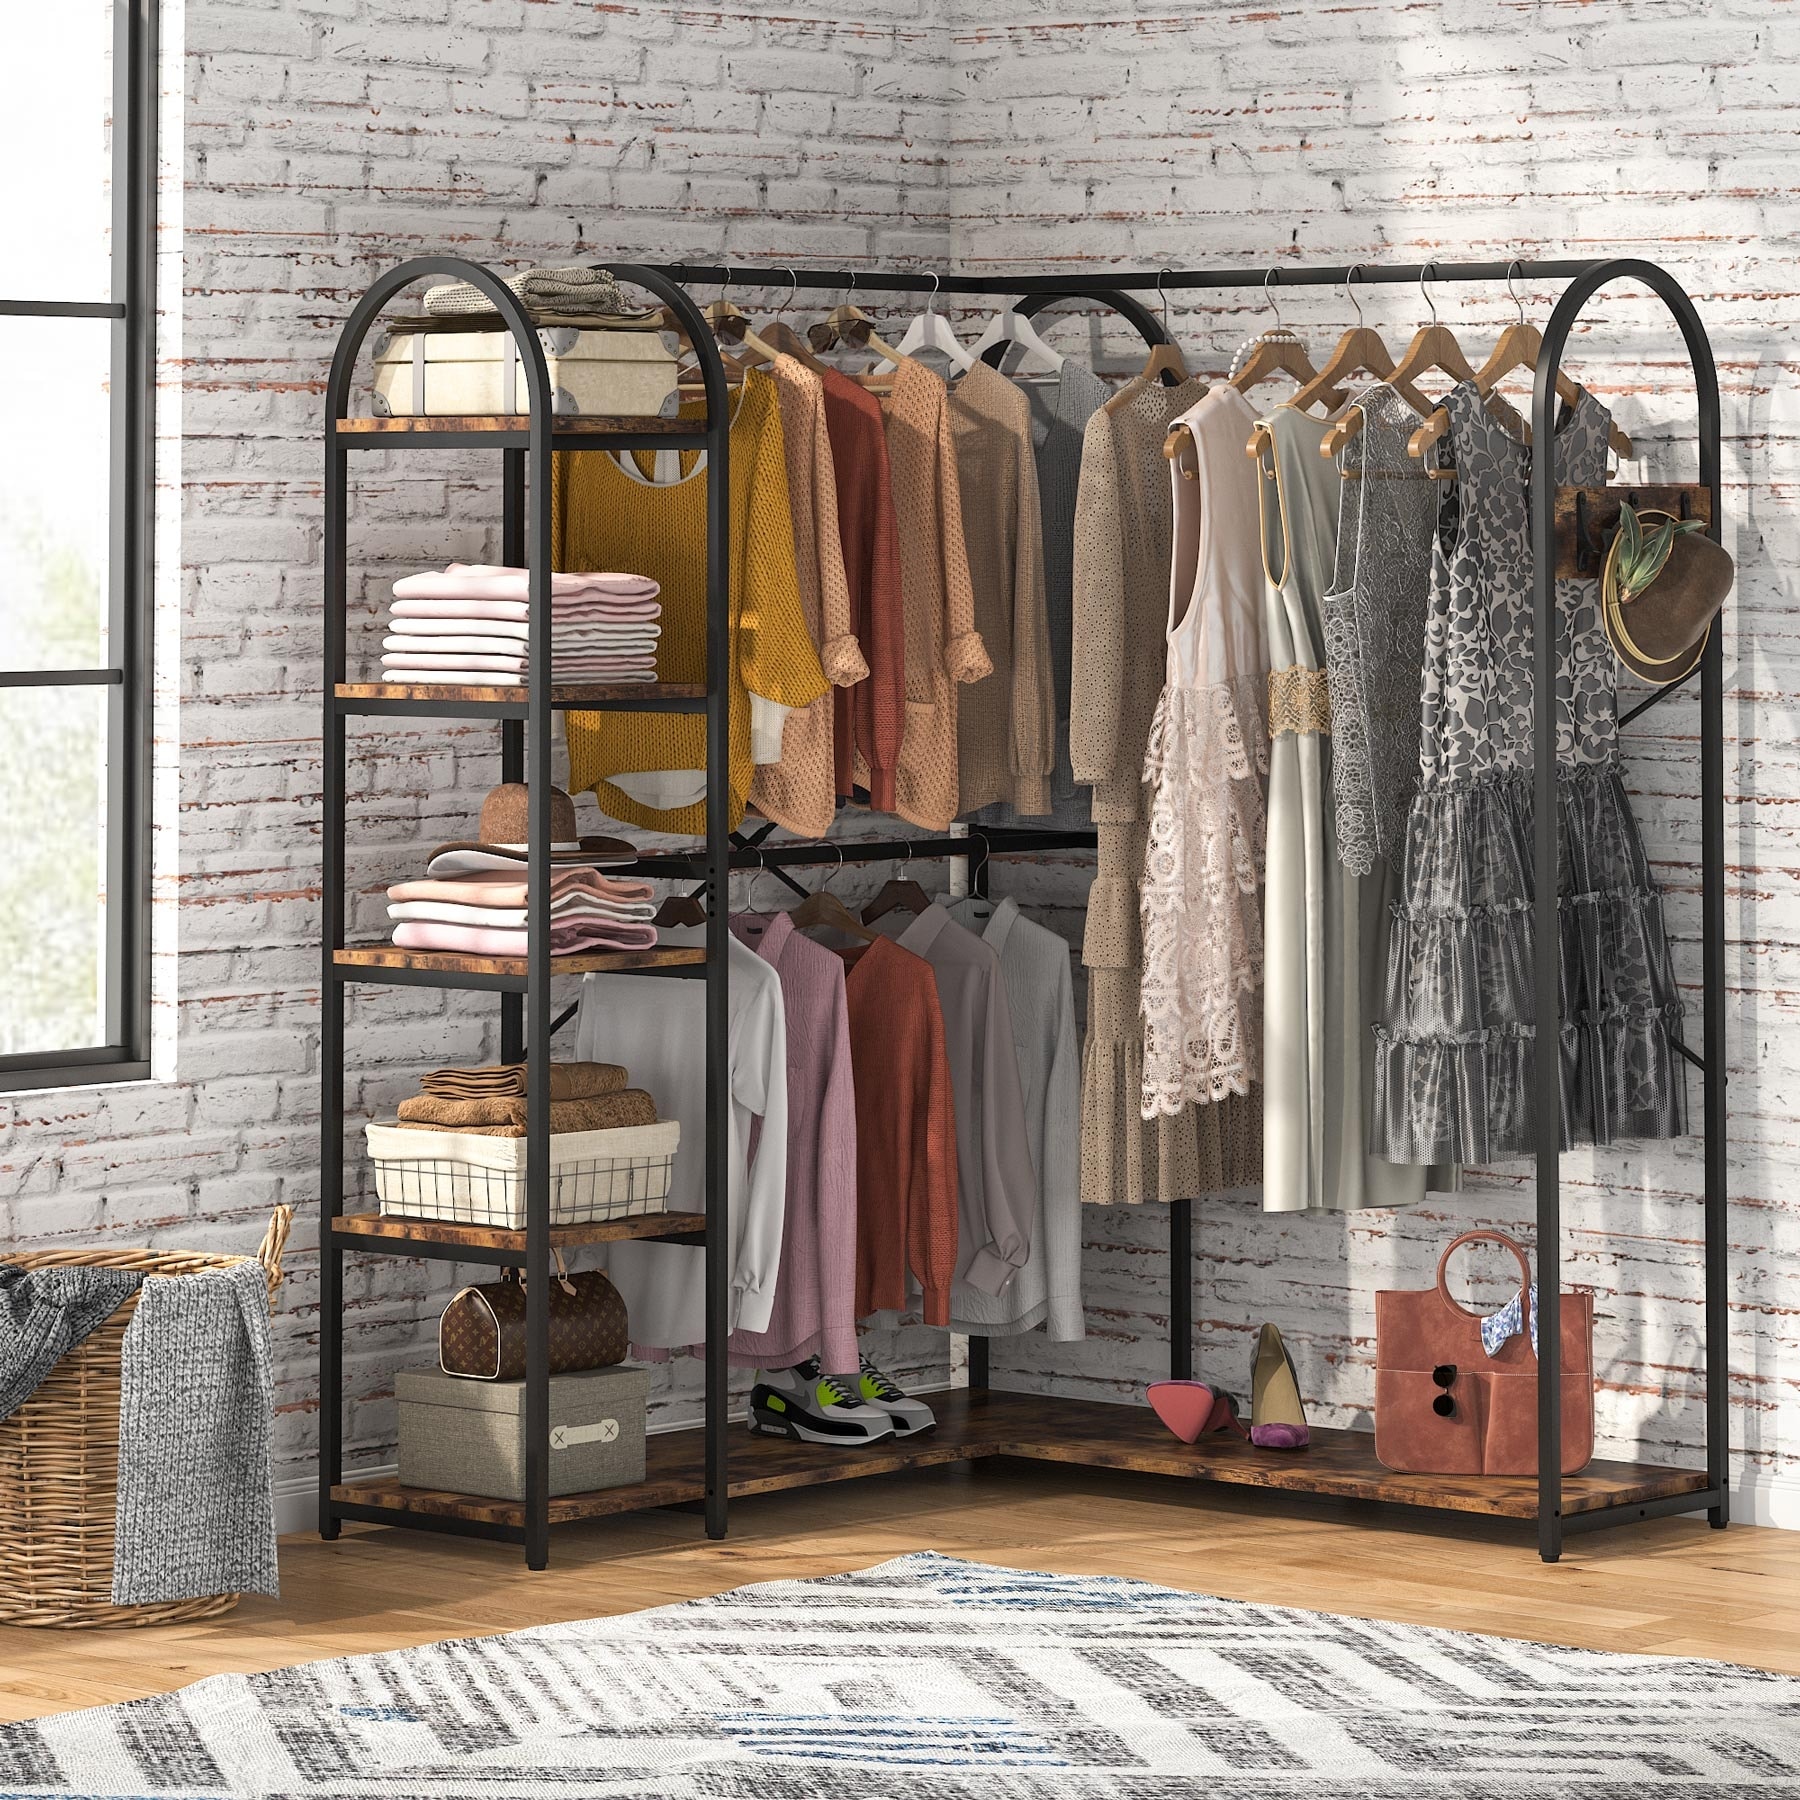 https://ak1.ostkcdn.com/images/products/is/images/direct/eb7c5b6c0946e03279dda4c8fcdf90d0f3dec6d3/L-Shape-Clothes-Rack%2C-Corner-Garment-Rack-with-Storage-Shelves-and-Hanging-Rods%2C-Large-Open-Wardrobe-Closet-for-Bedroom.jpg